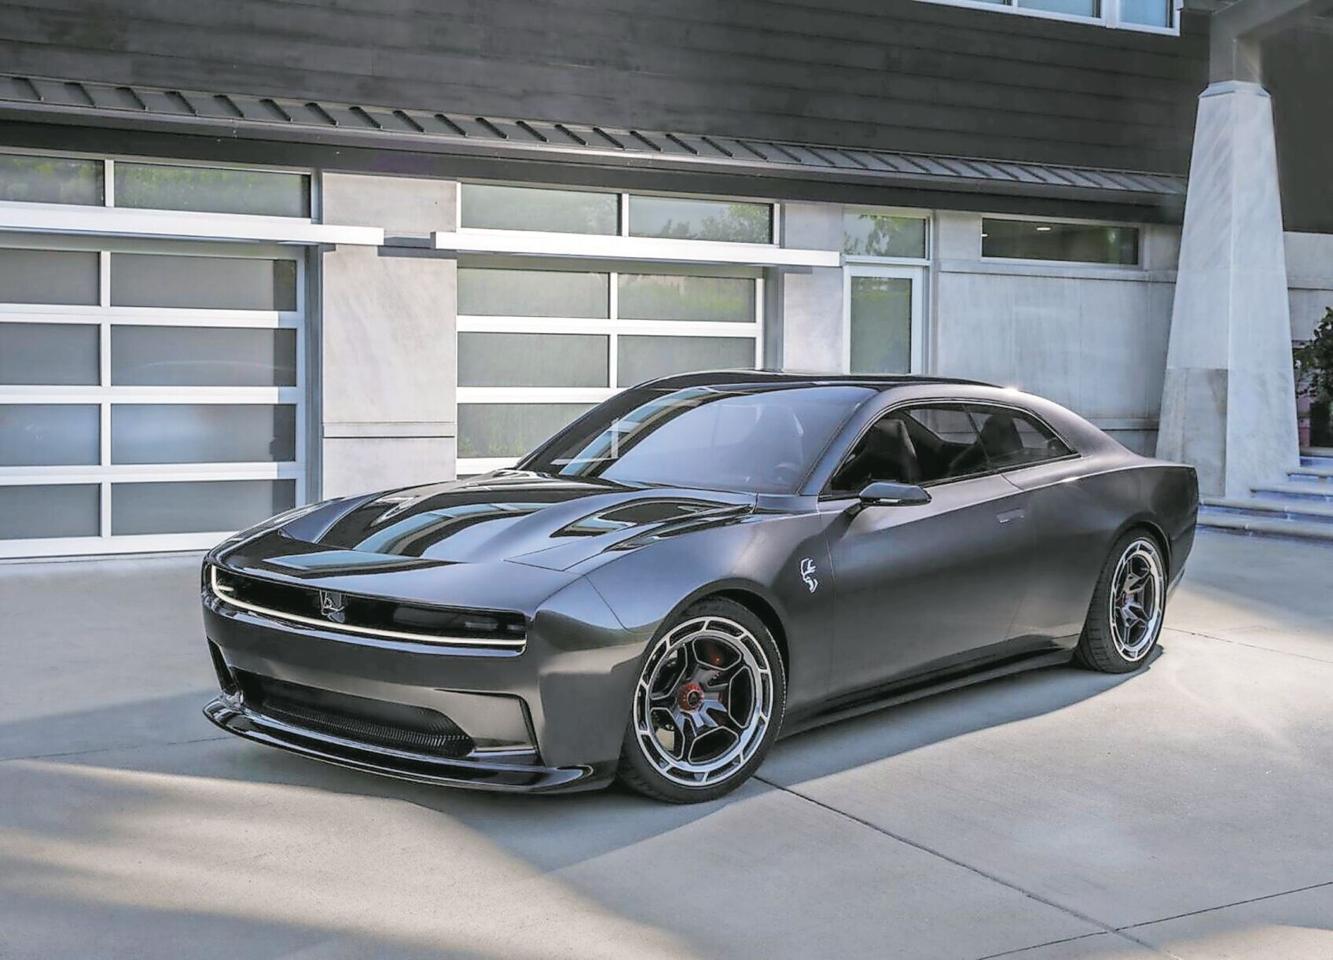 Dodge Charger Daytona Srt Concept The Electric Muscle Car Of 2024 Lifestyle